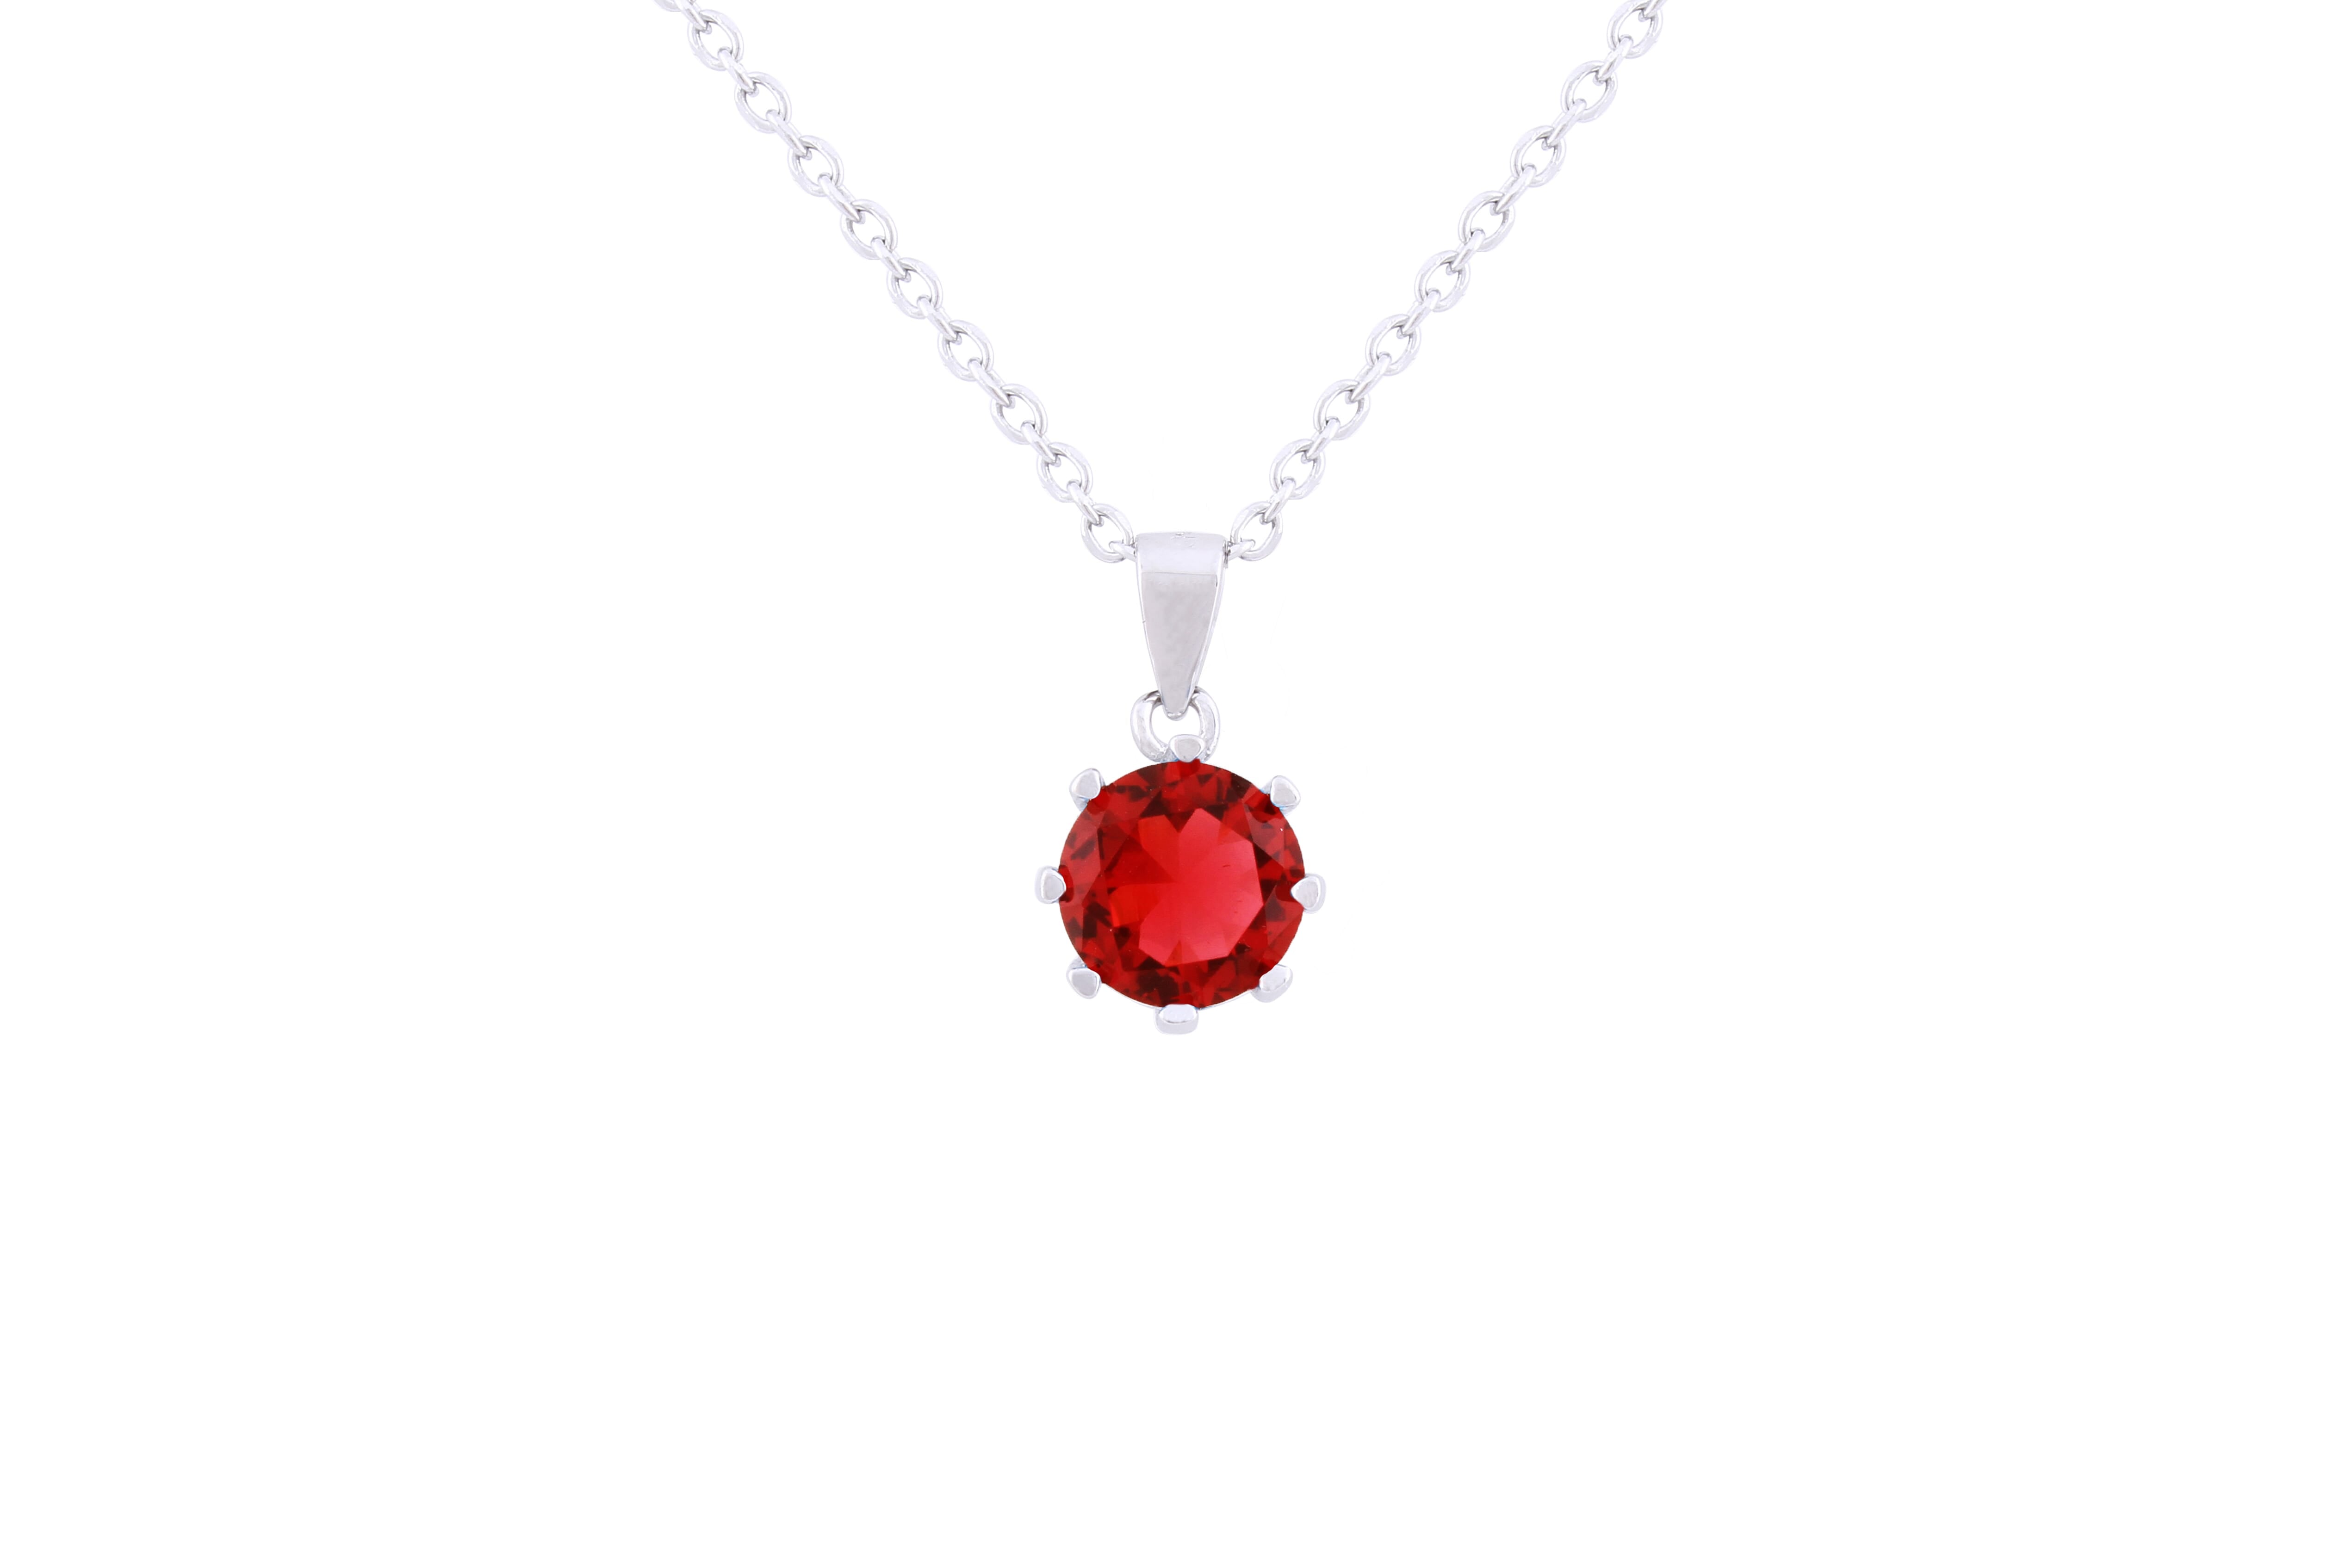 Asfour 925 Sterling Silver Necklace Inlaid With Round Red Zircon Stone NR0501-R